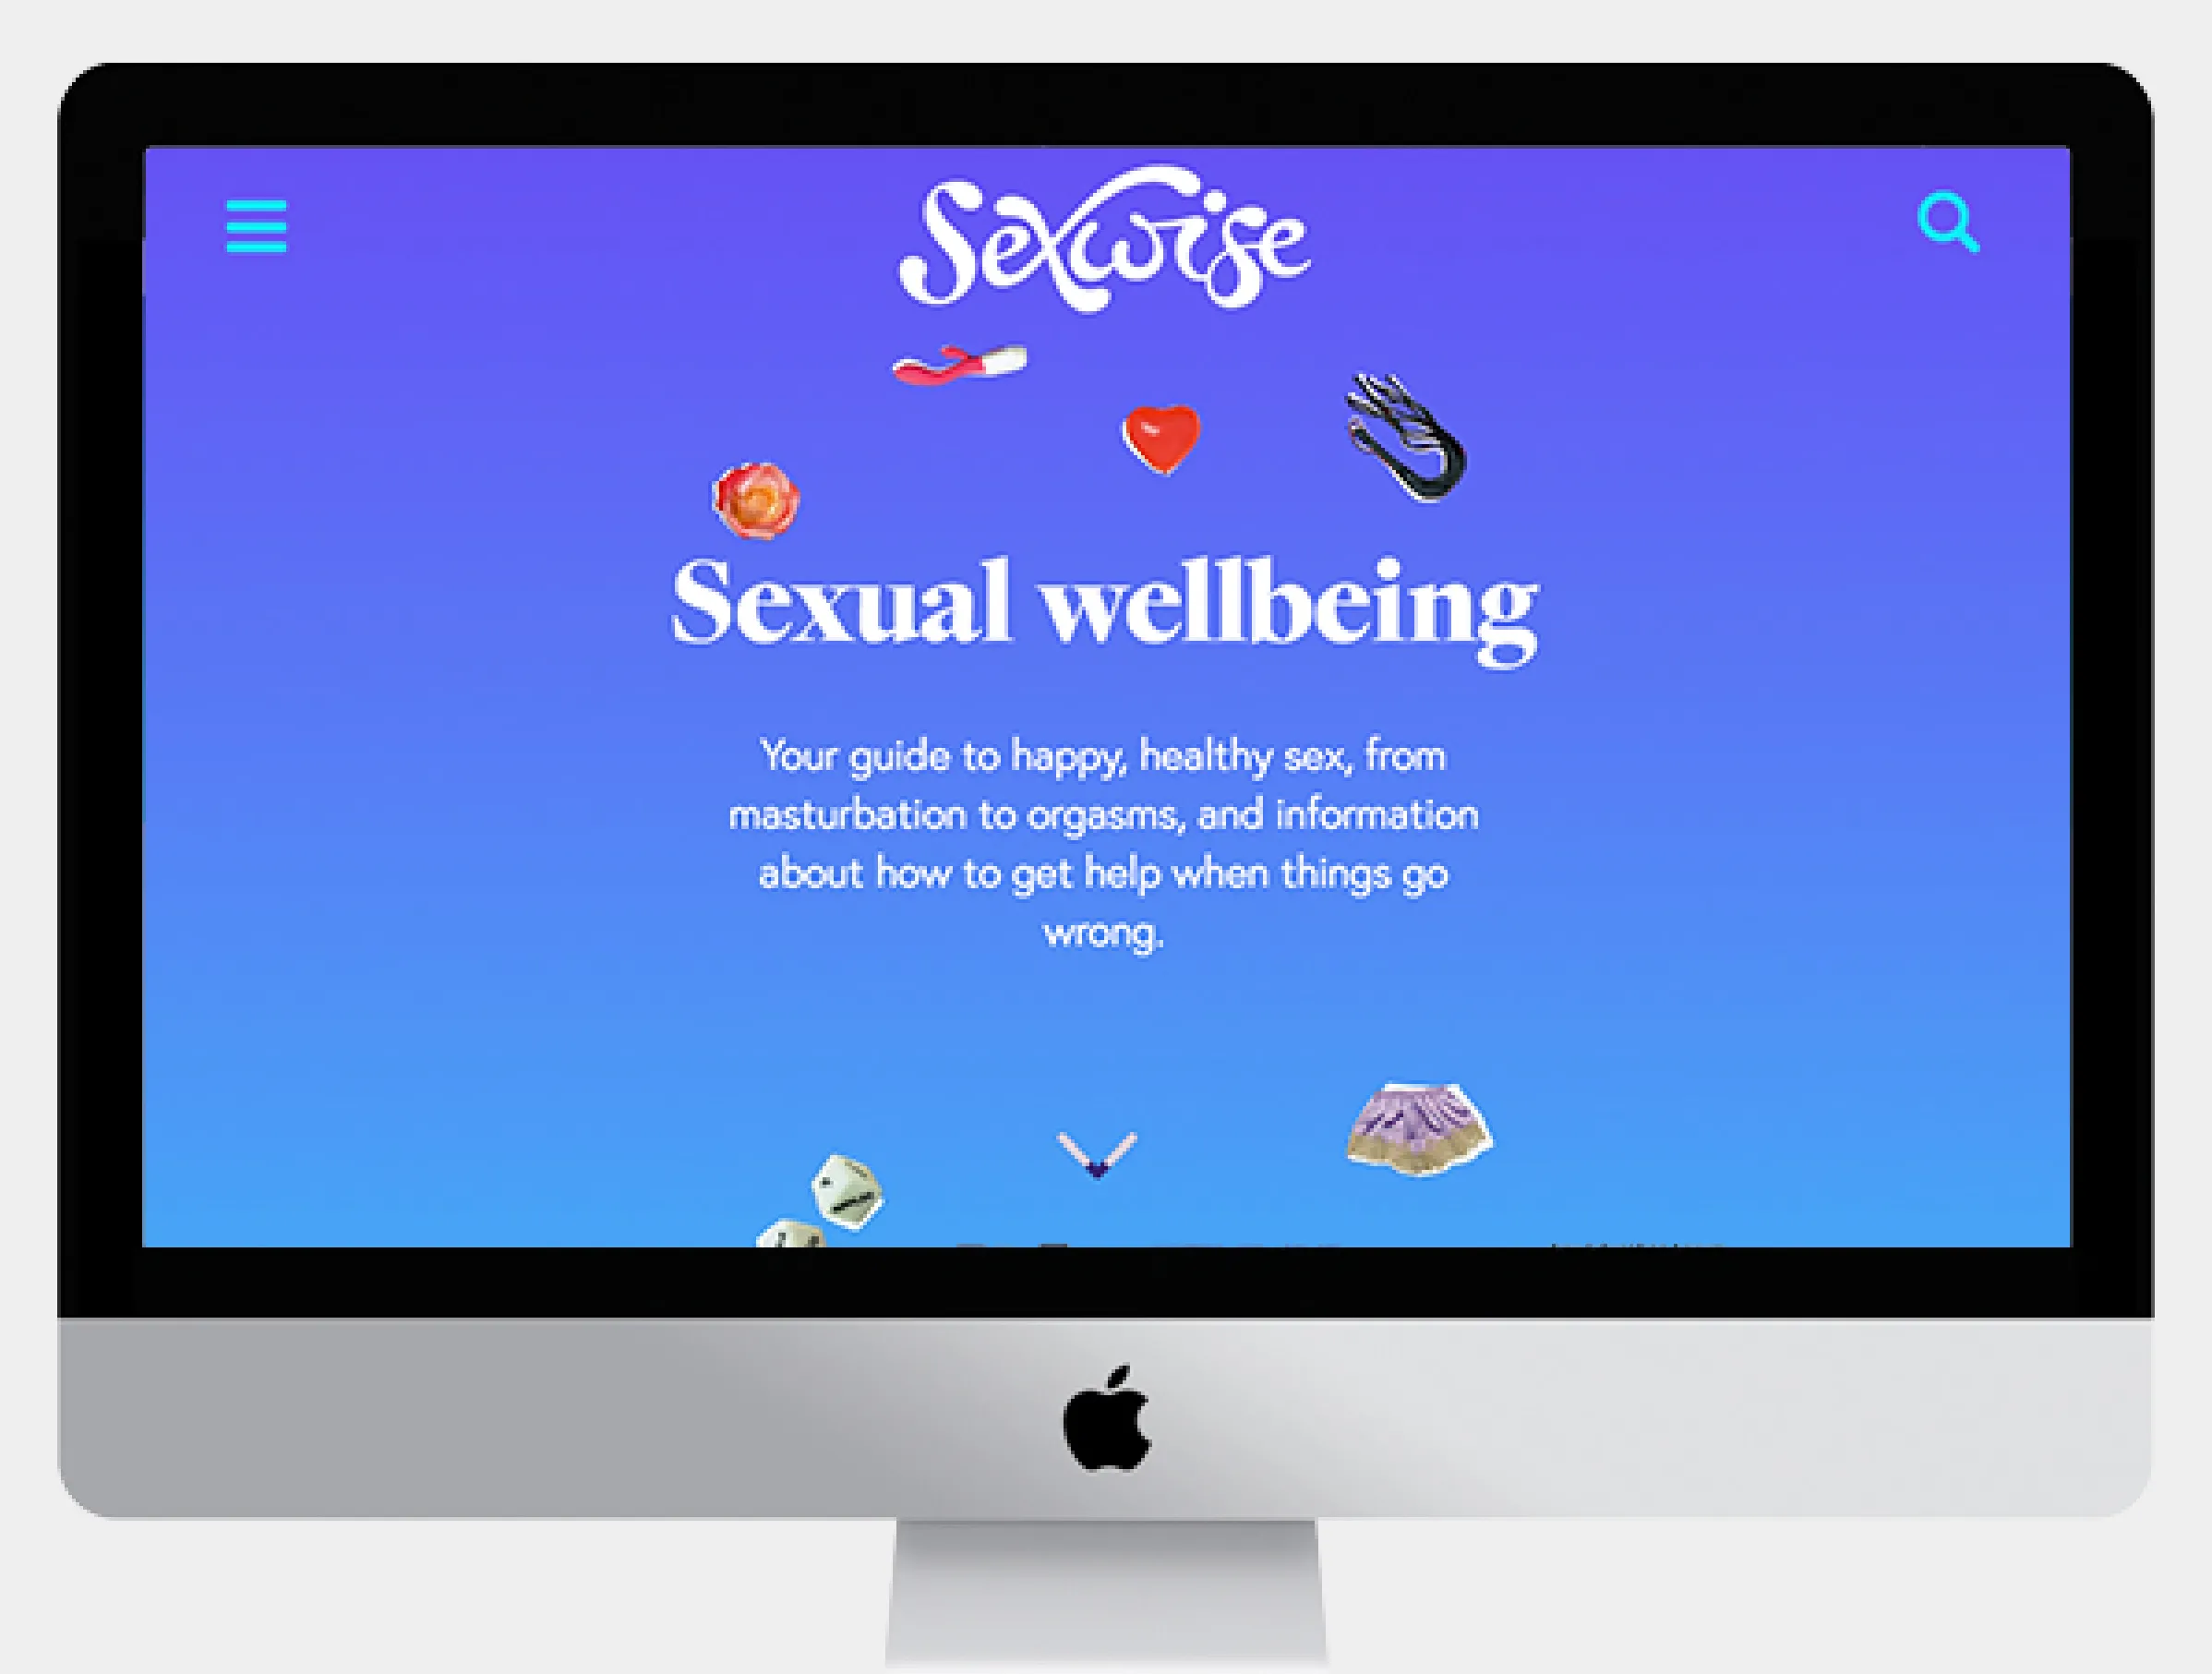 Sexwise website on a laptop